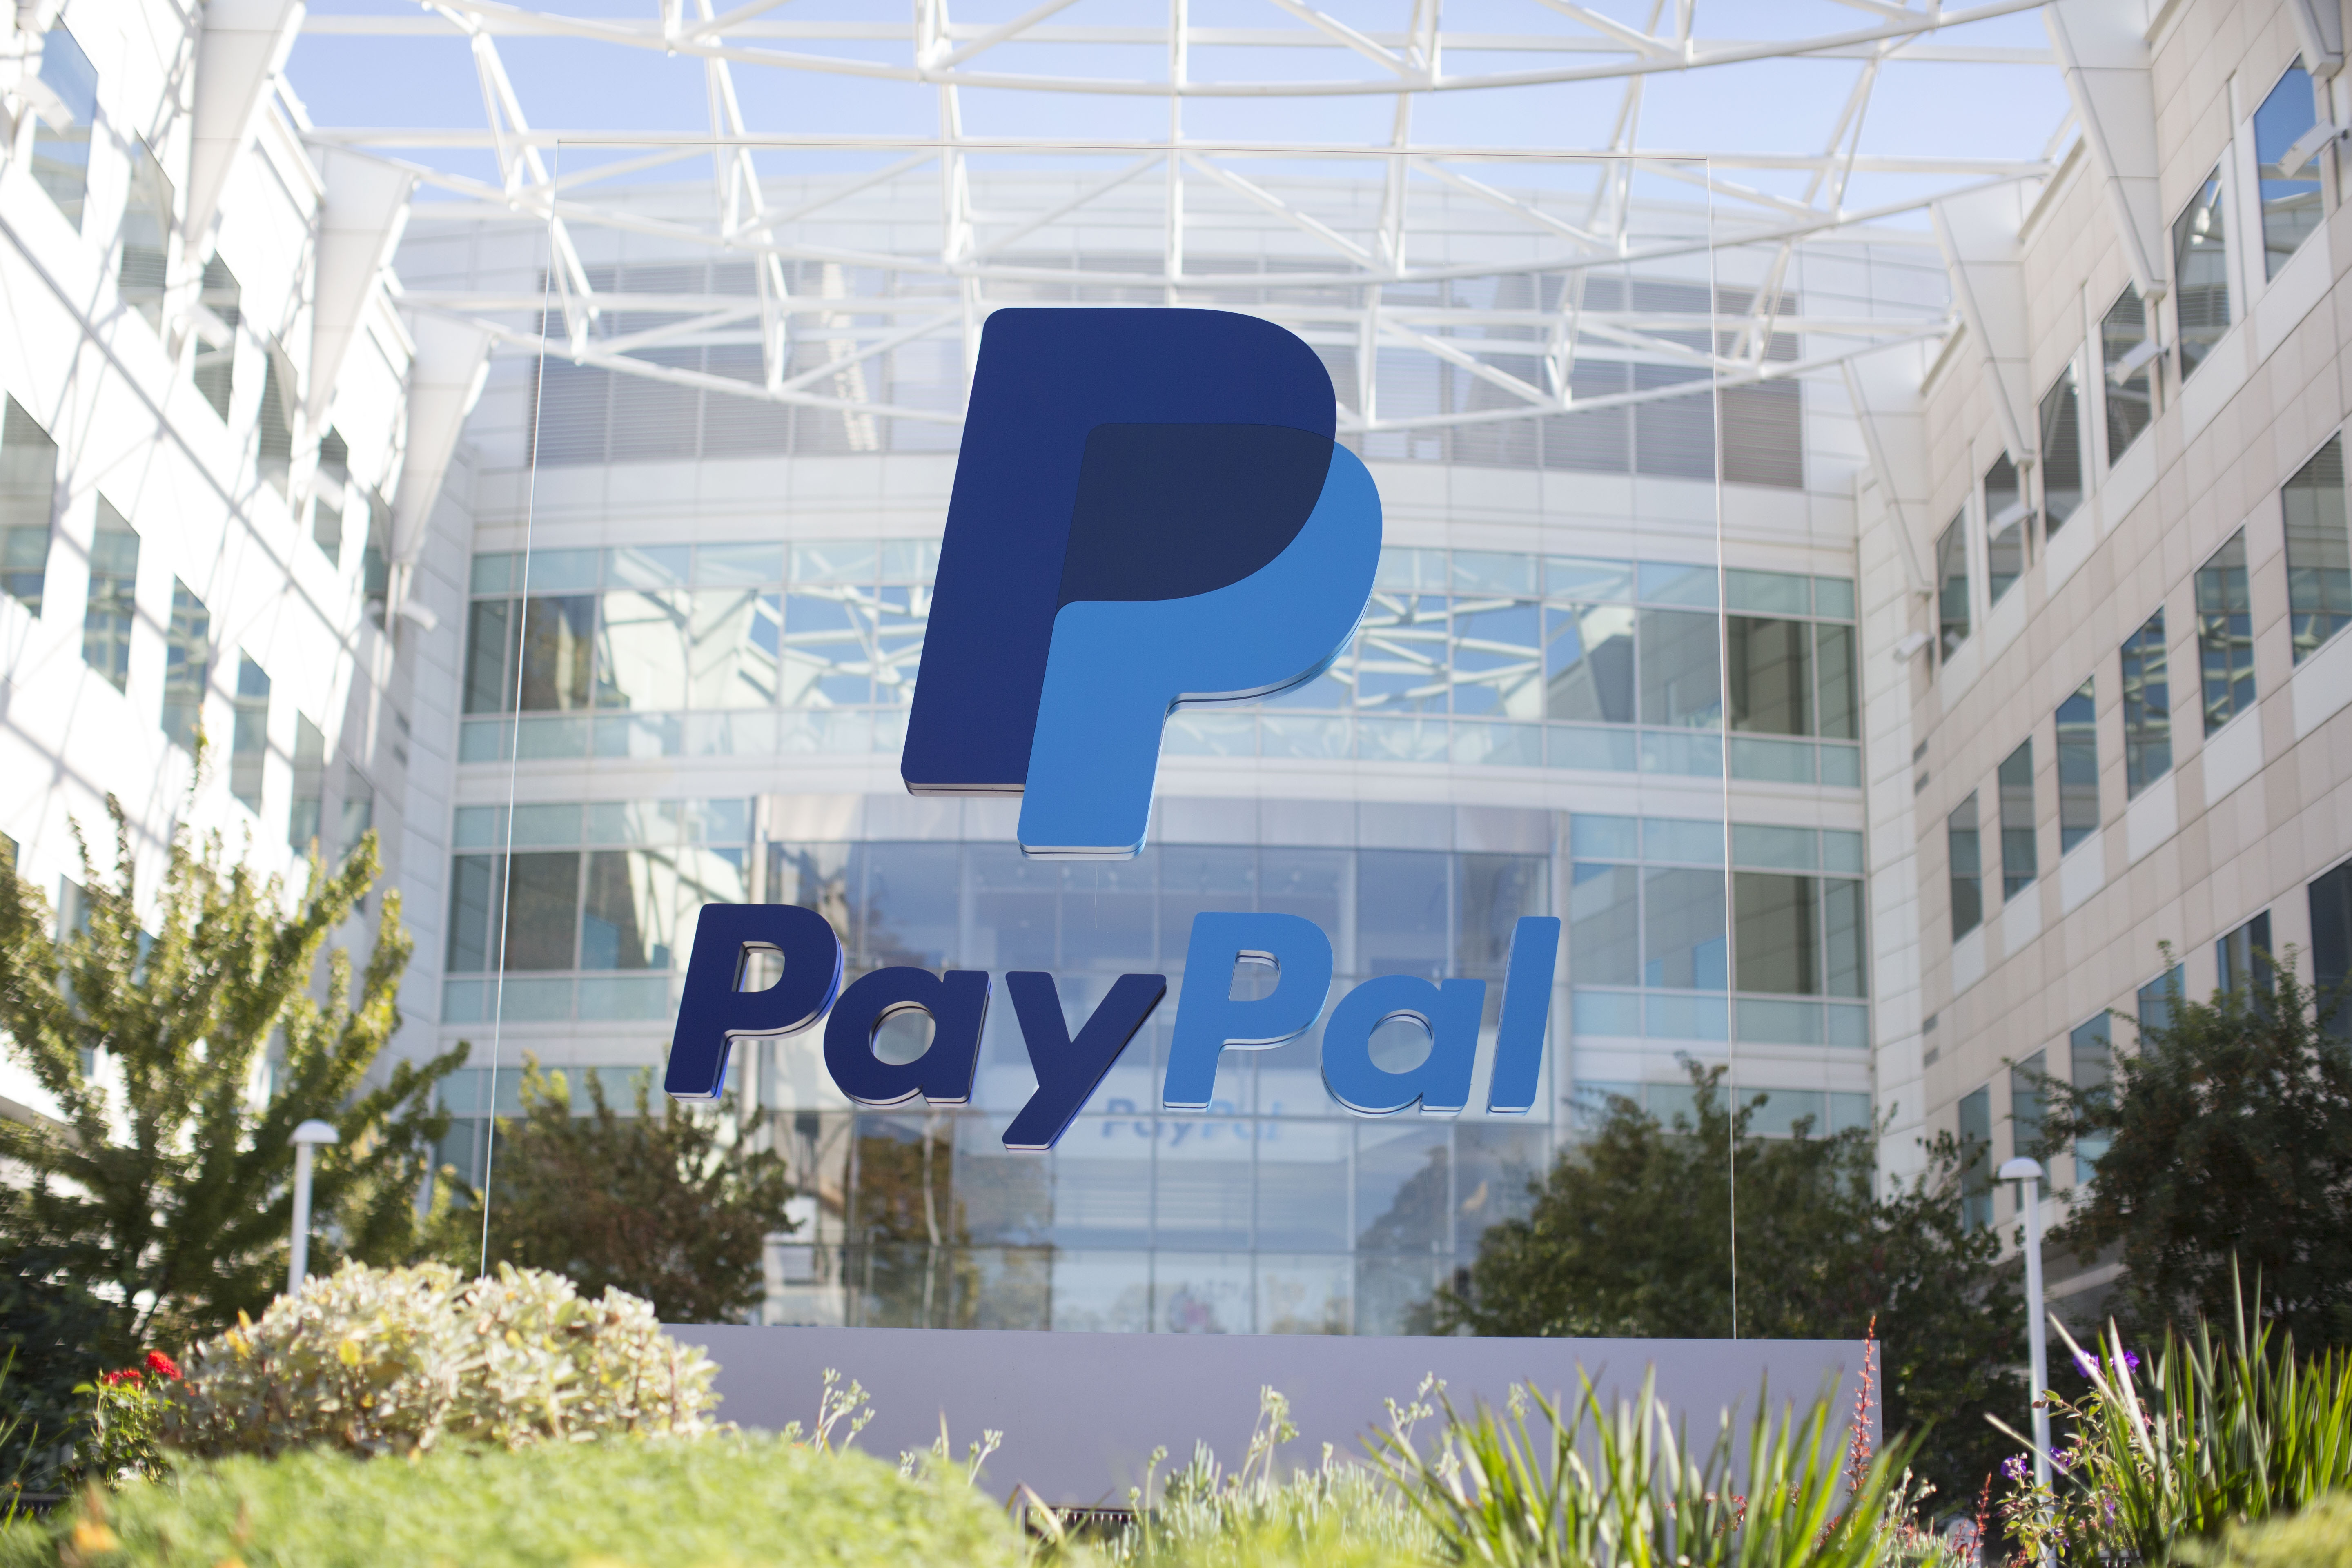 How Does PayPal Work? - NerdWallet